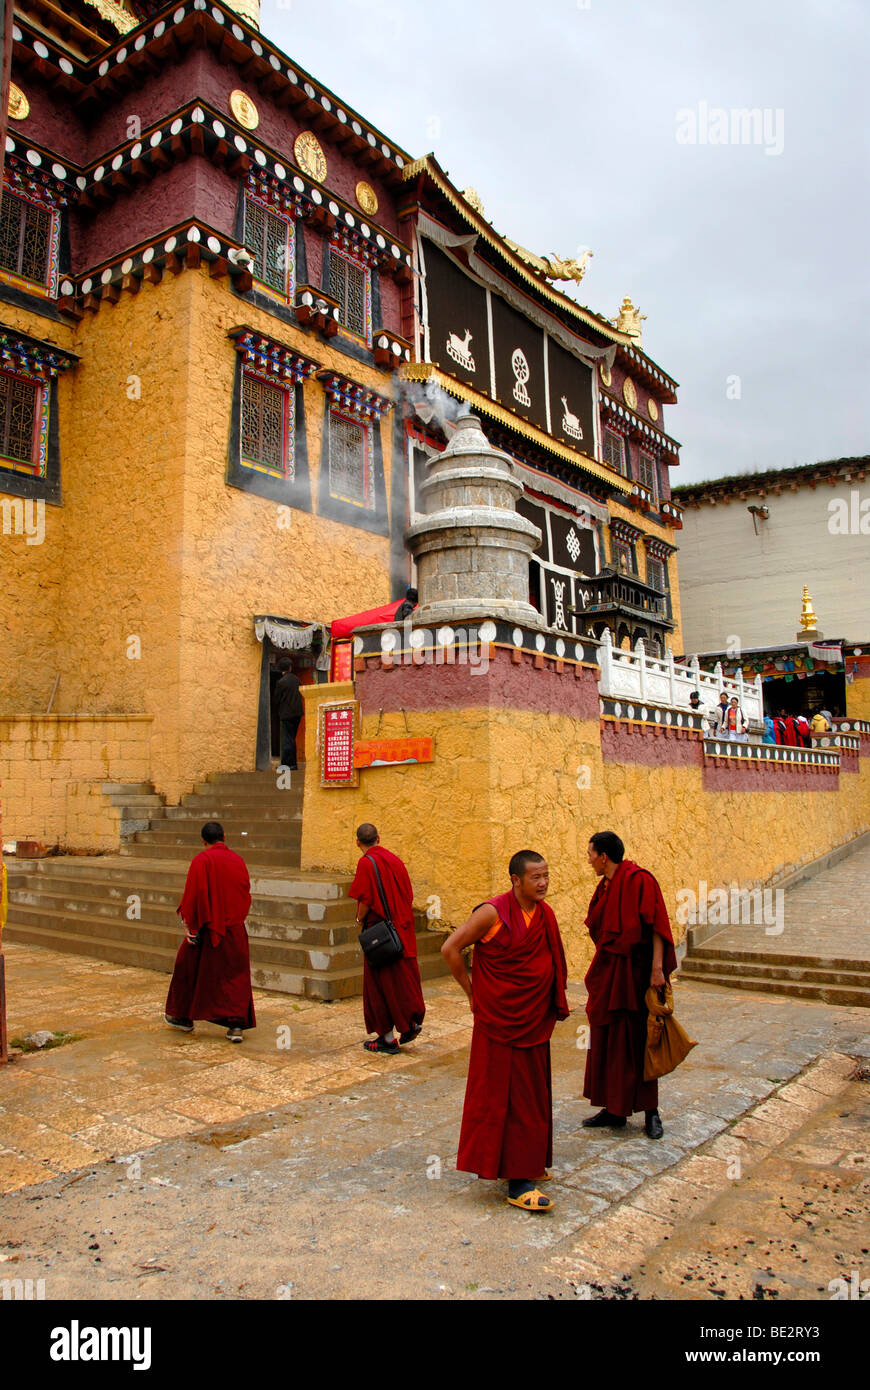 Tibetan Buddhist monks in red robes in front of the temple, Monastery Ganden Sumtseling Gompa, Zhongdian, Shangri-La, Yunnan Pr Stock Photo